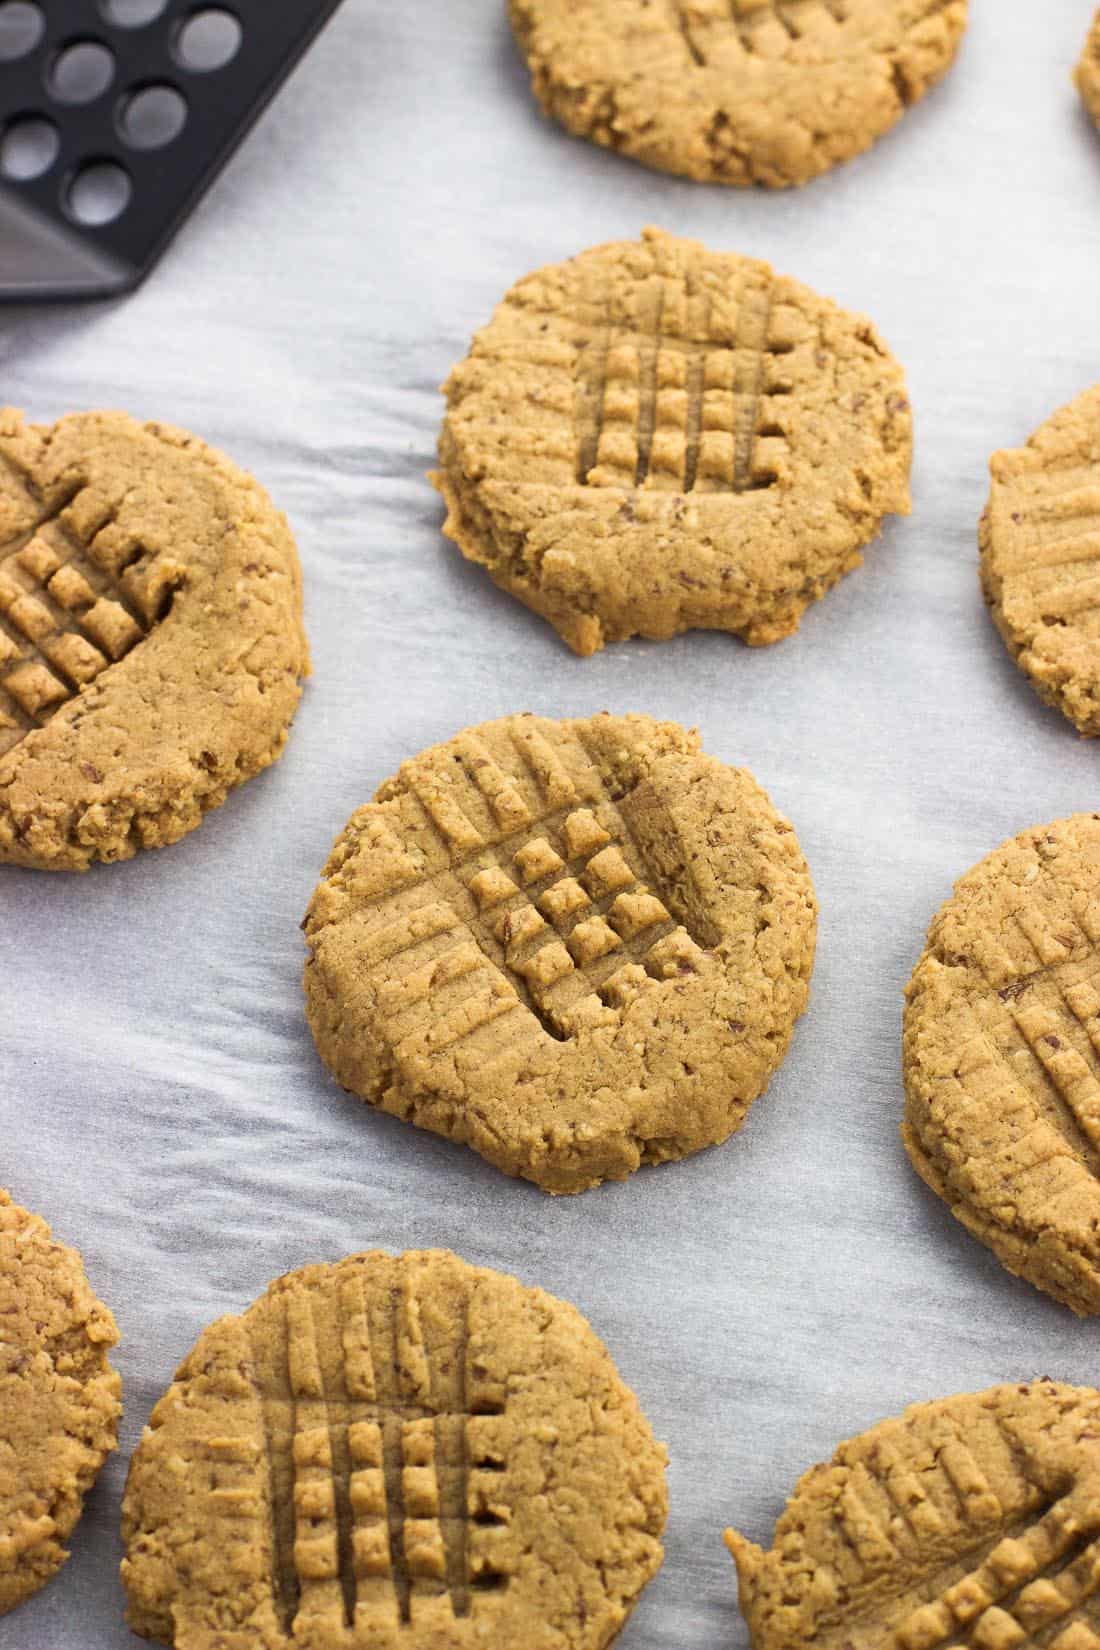 Peanut butter cookies on a sheet of parchment paper.